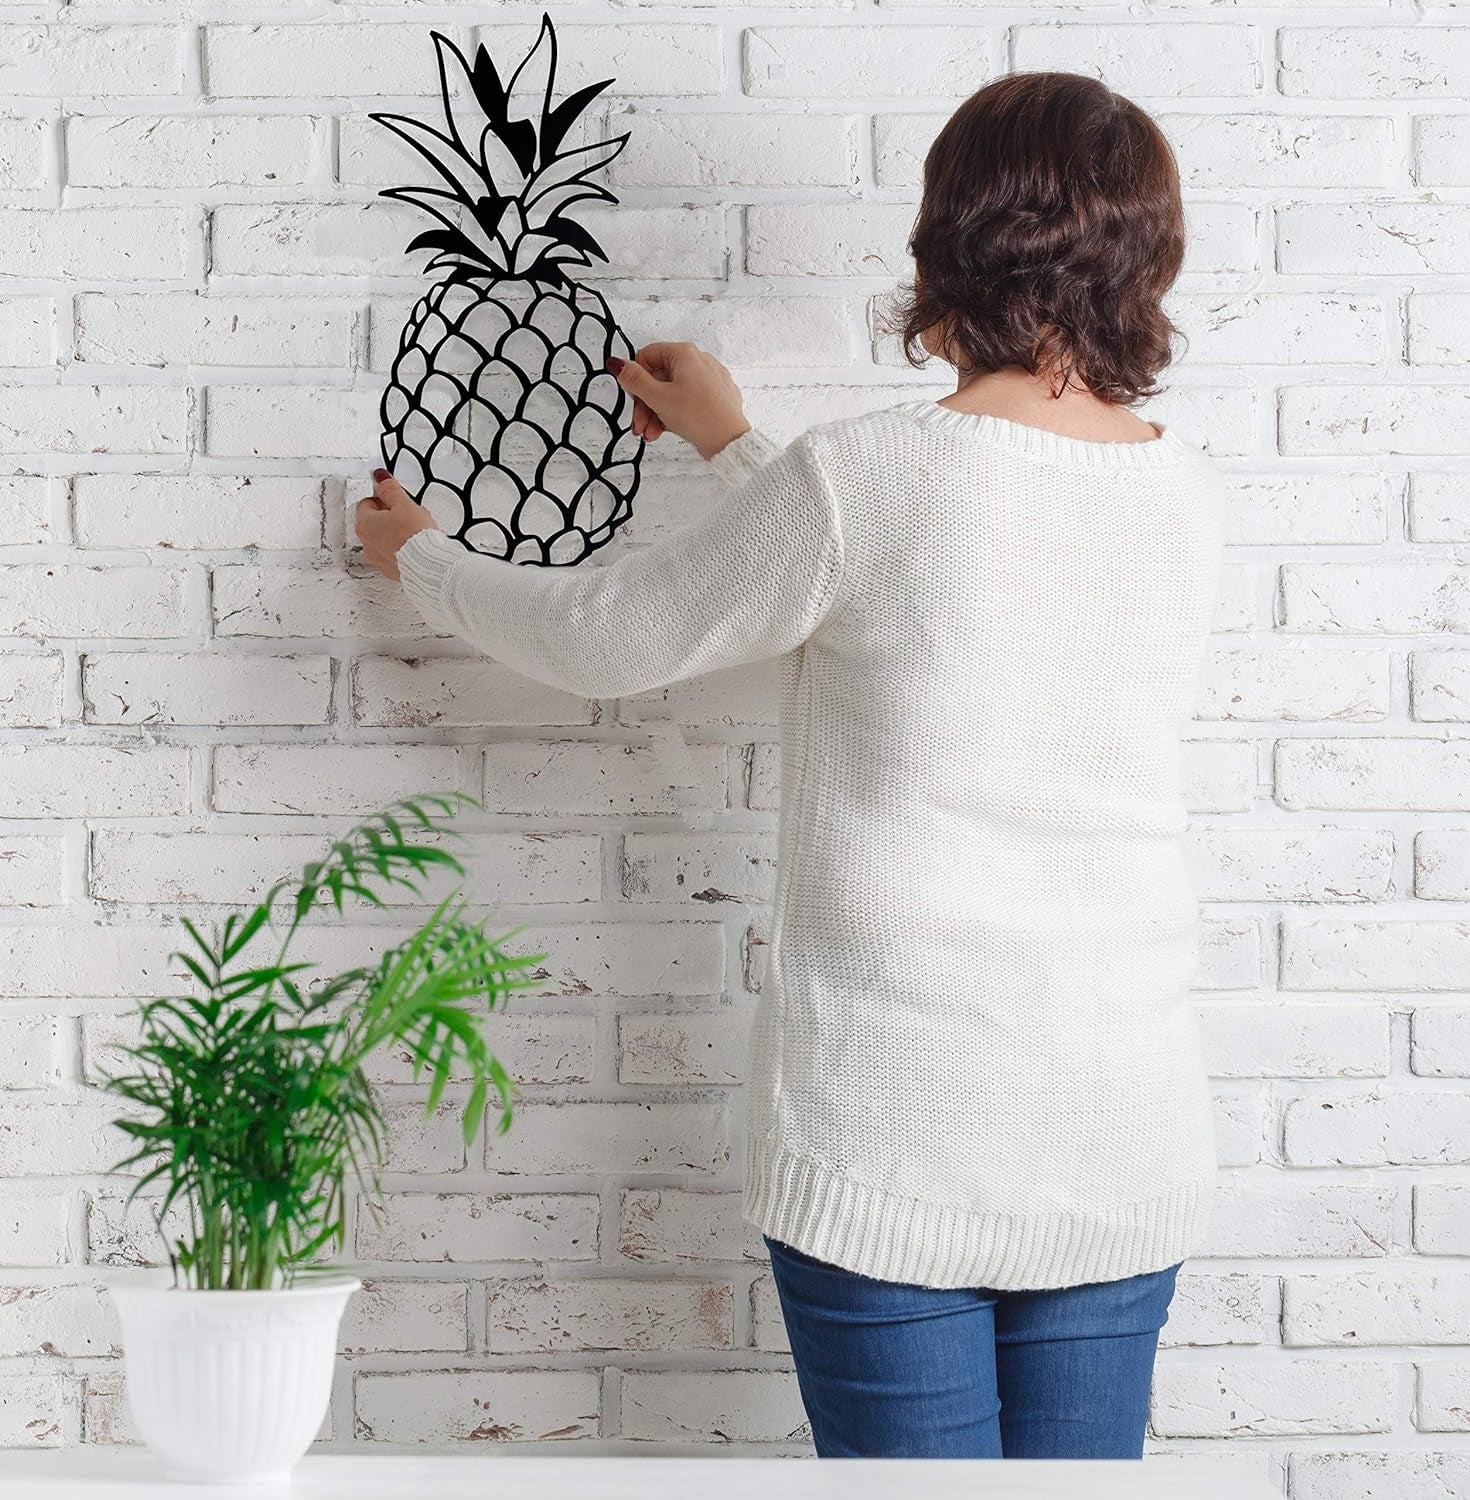 Metal Pineapple Wall Decor, Tropical Pineapple Art Wall Hanging Home Outdoor Decorations for Kitchen Bathroom Bedroom and Living Room (Black)